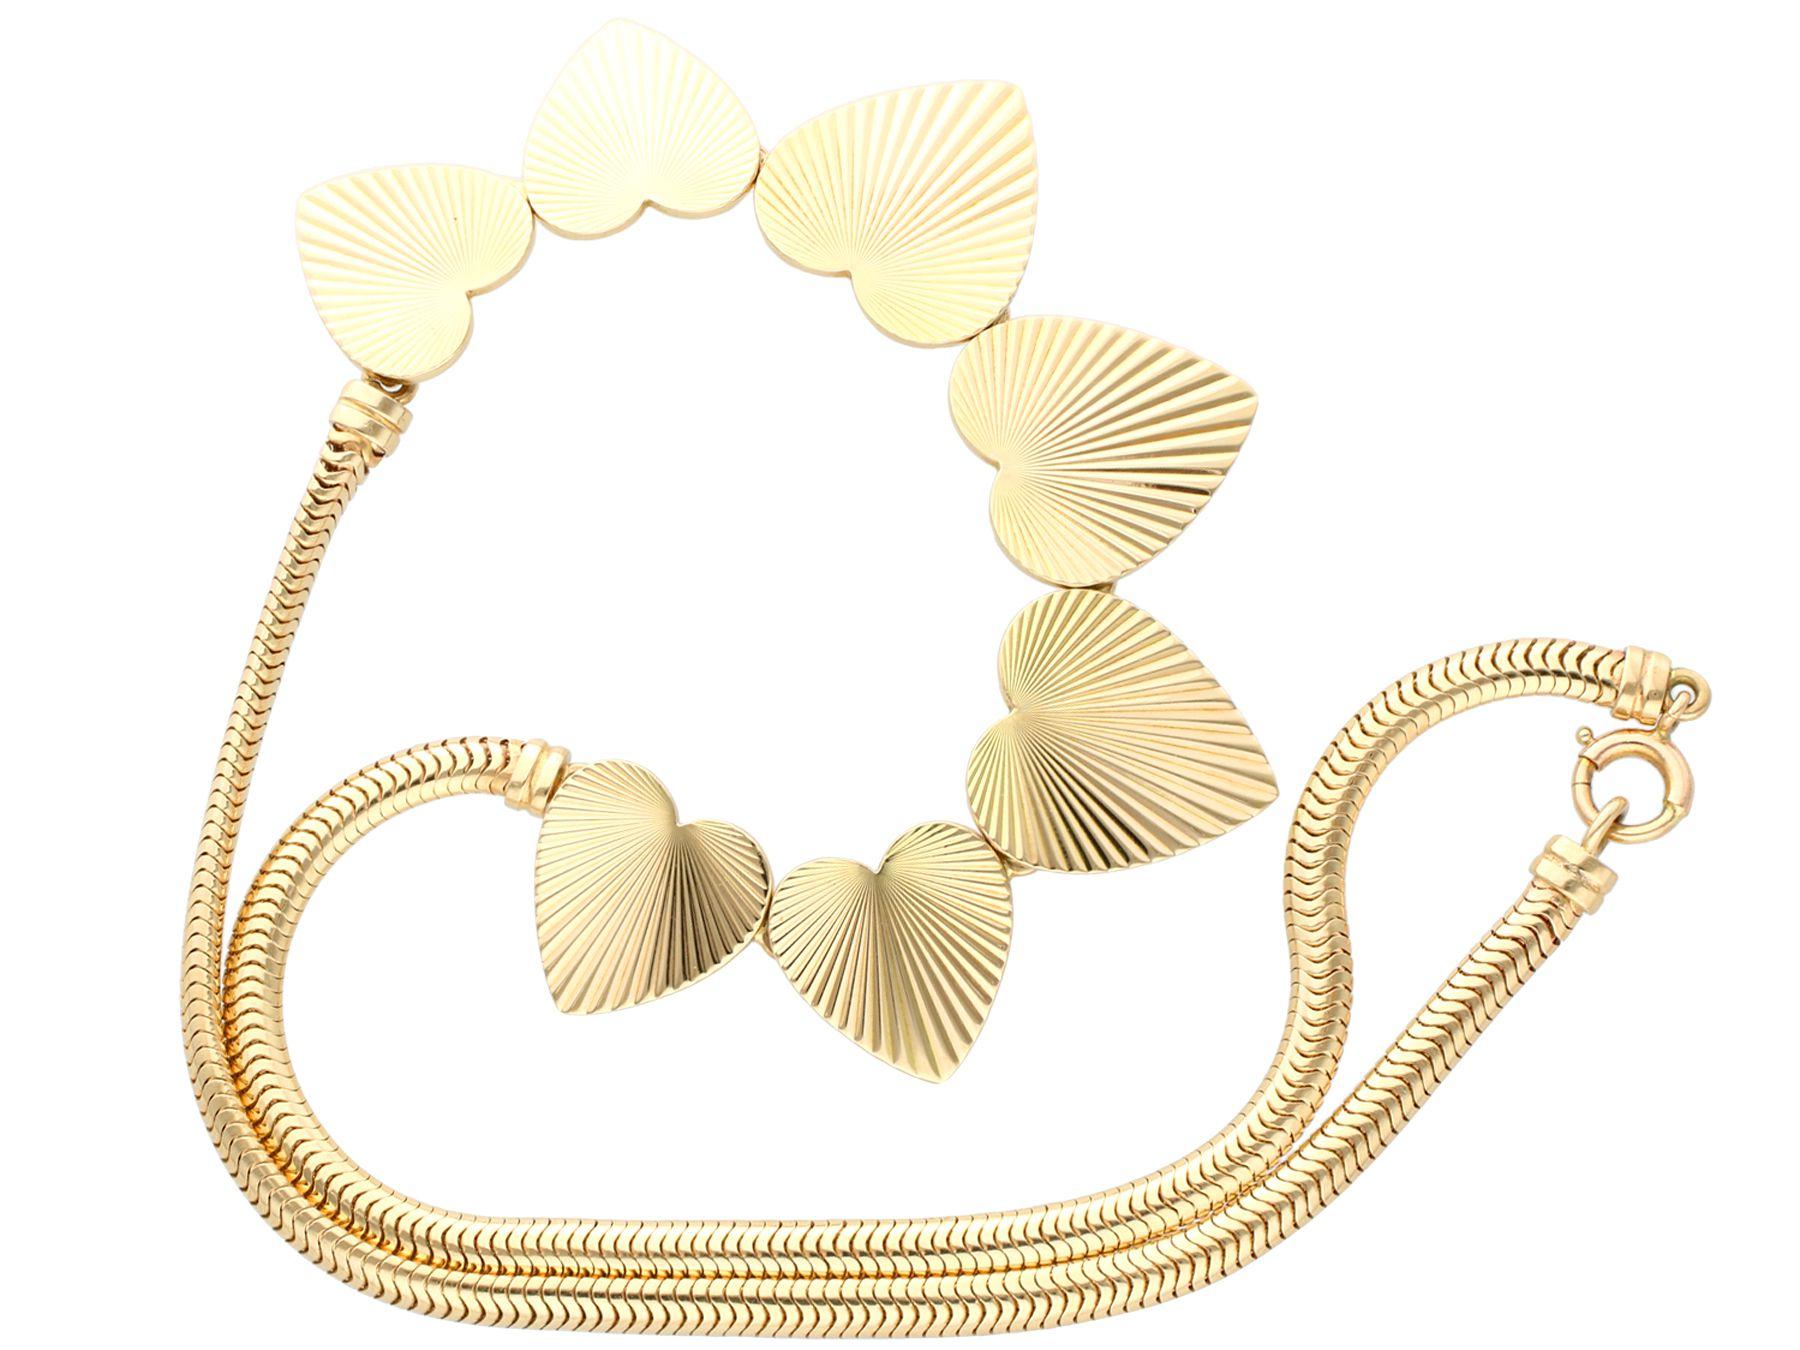 A stunning, fine and impressive vintage 14 karat yellow gold heart necklace made by Tiffany & Co; part of our diverse vintage and estate jewelry collections.

This stunning, fine and impressive vintage necklace has been crafted in 14k yellow